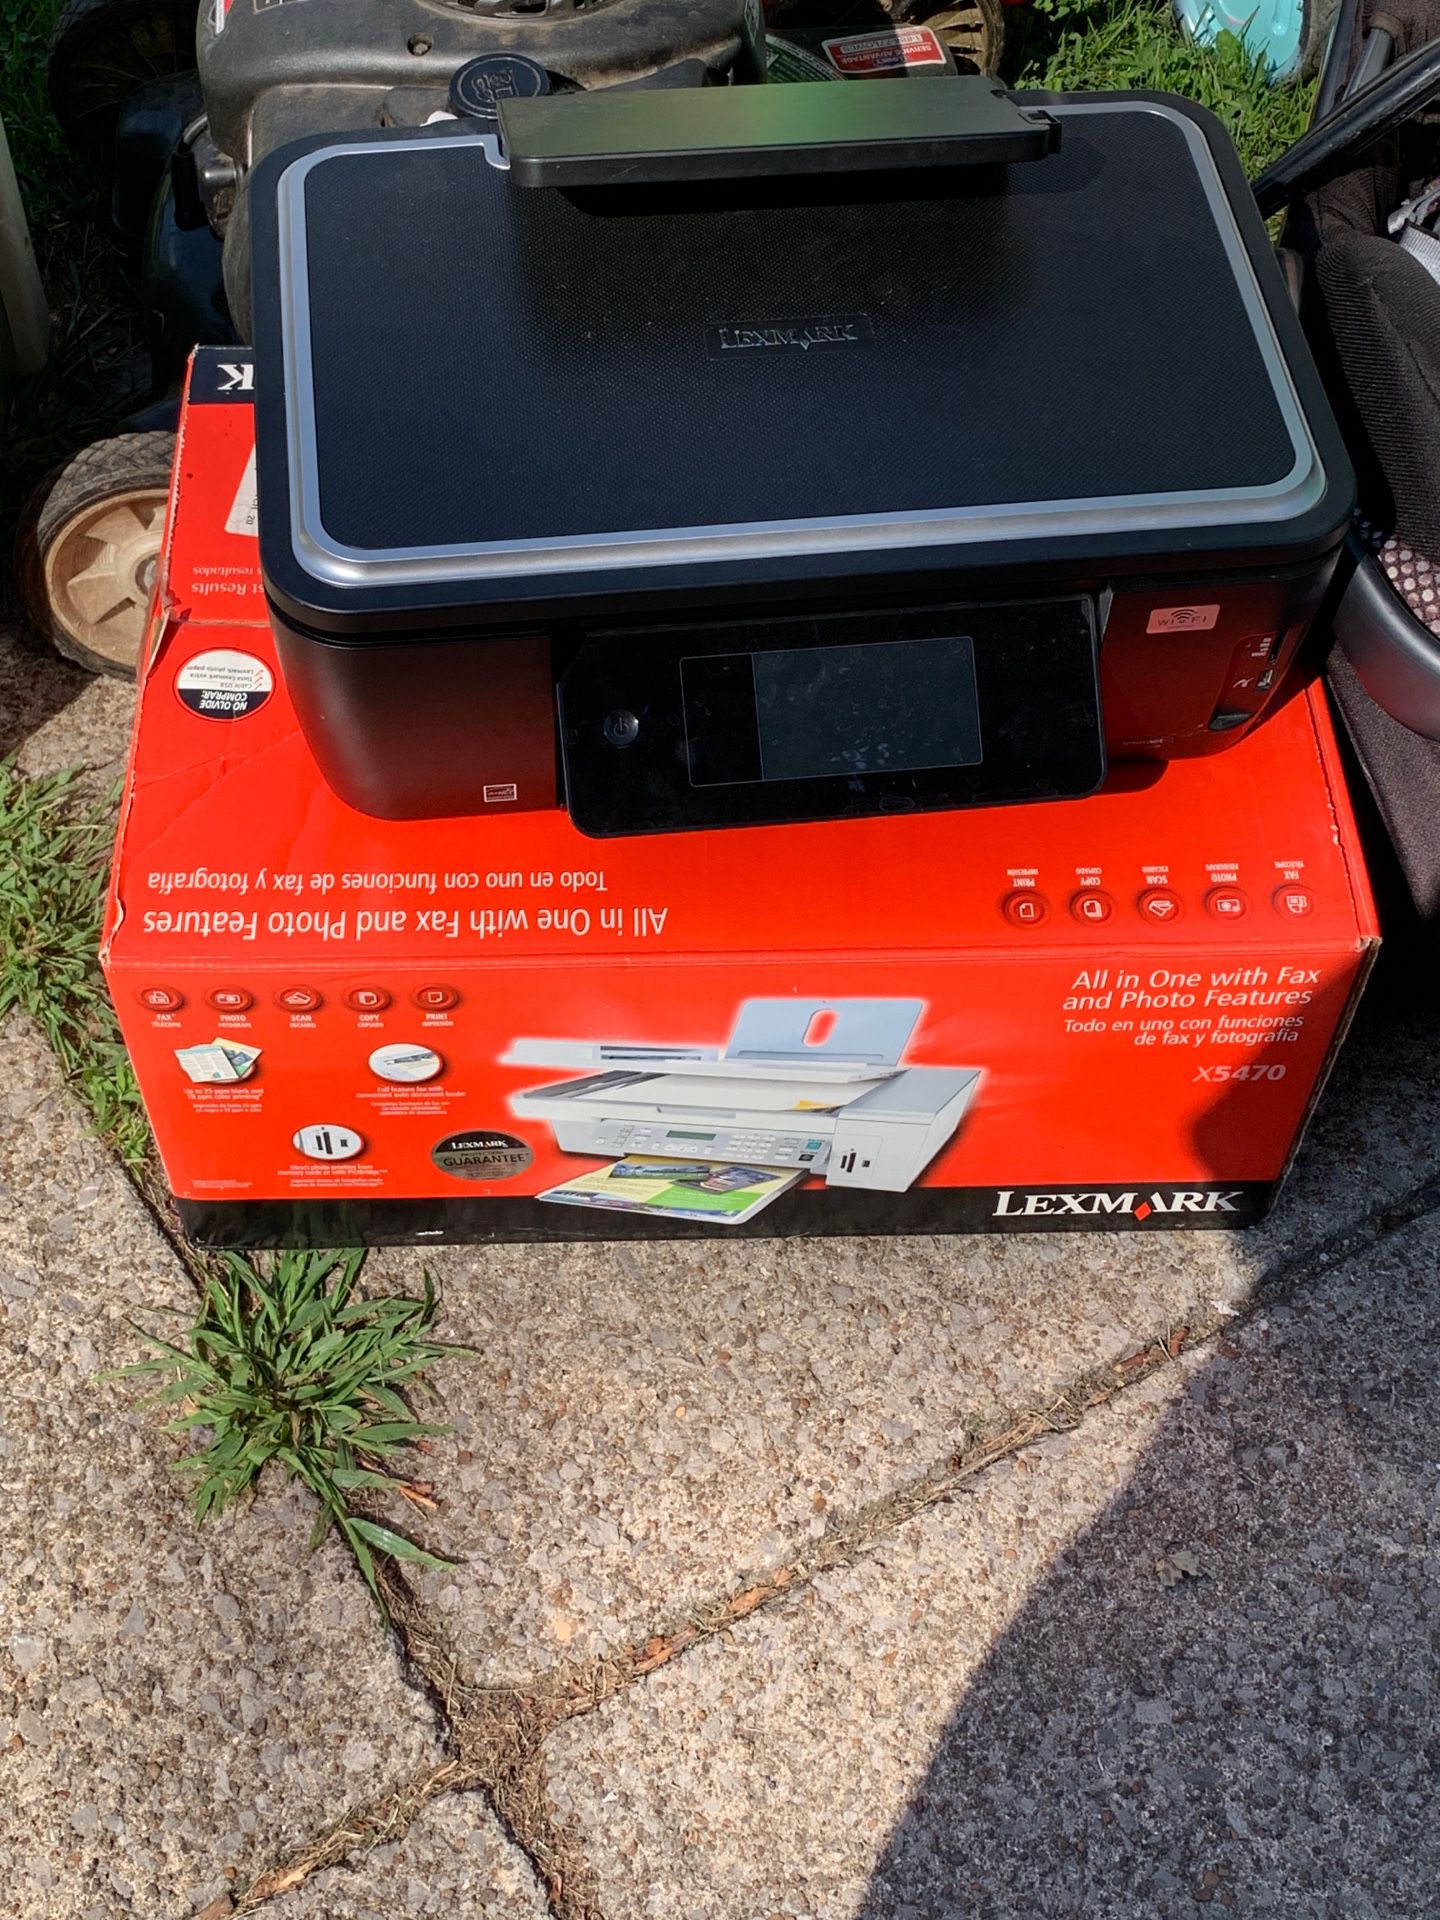 Two Printers $5 each- Parma Heights